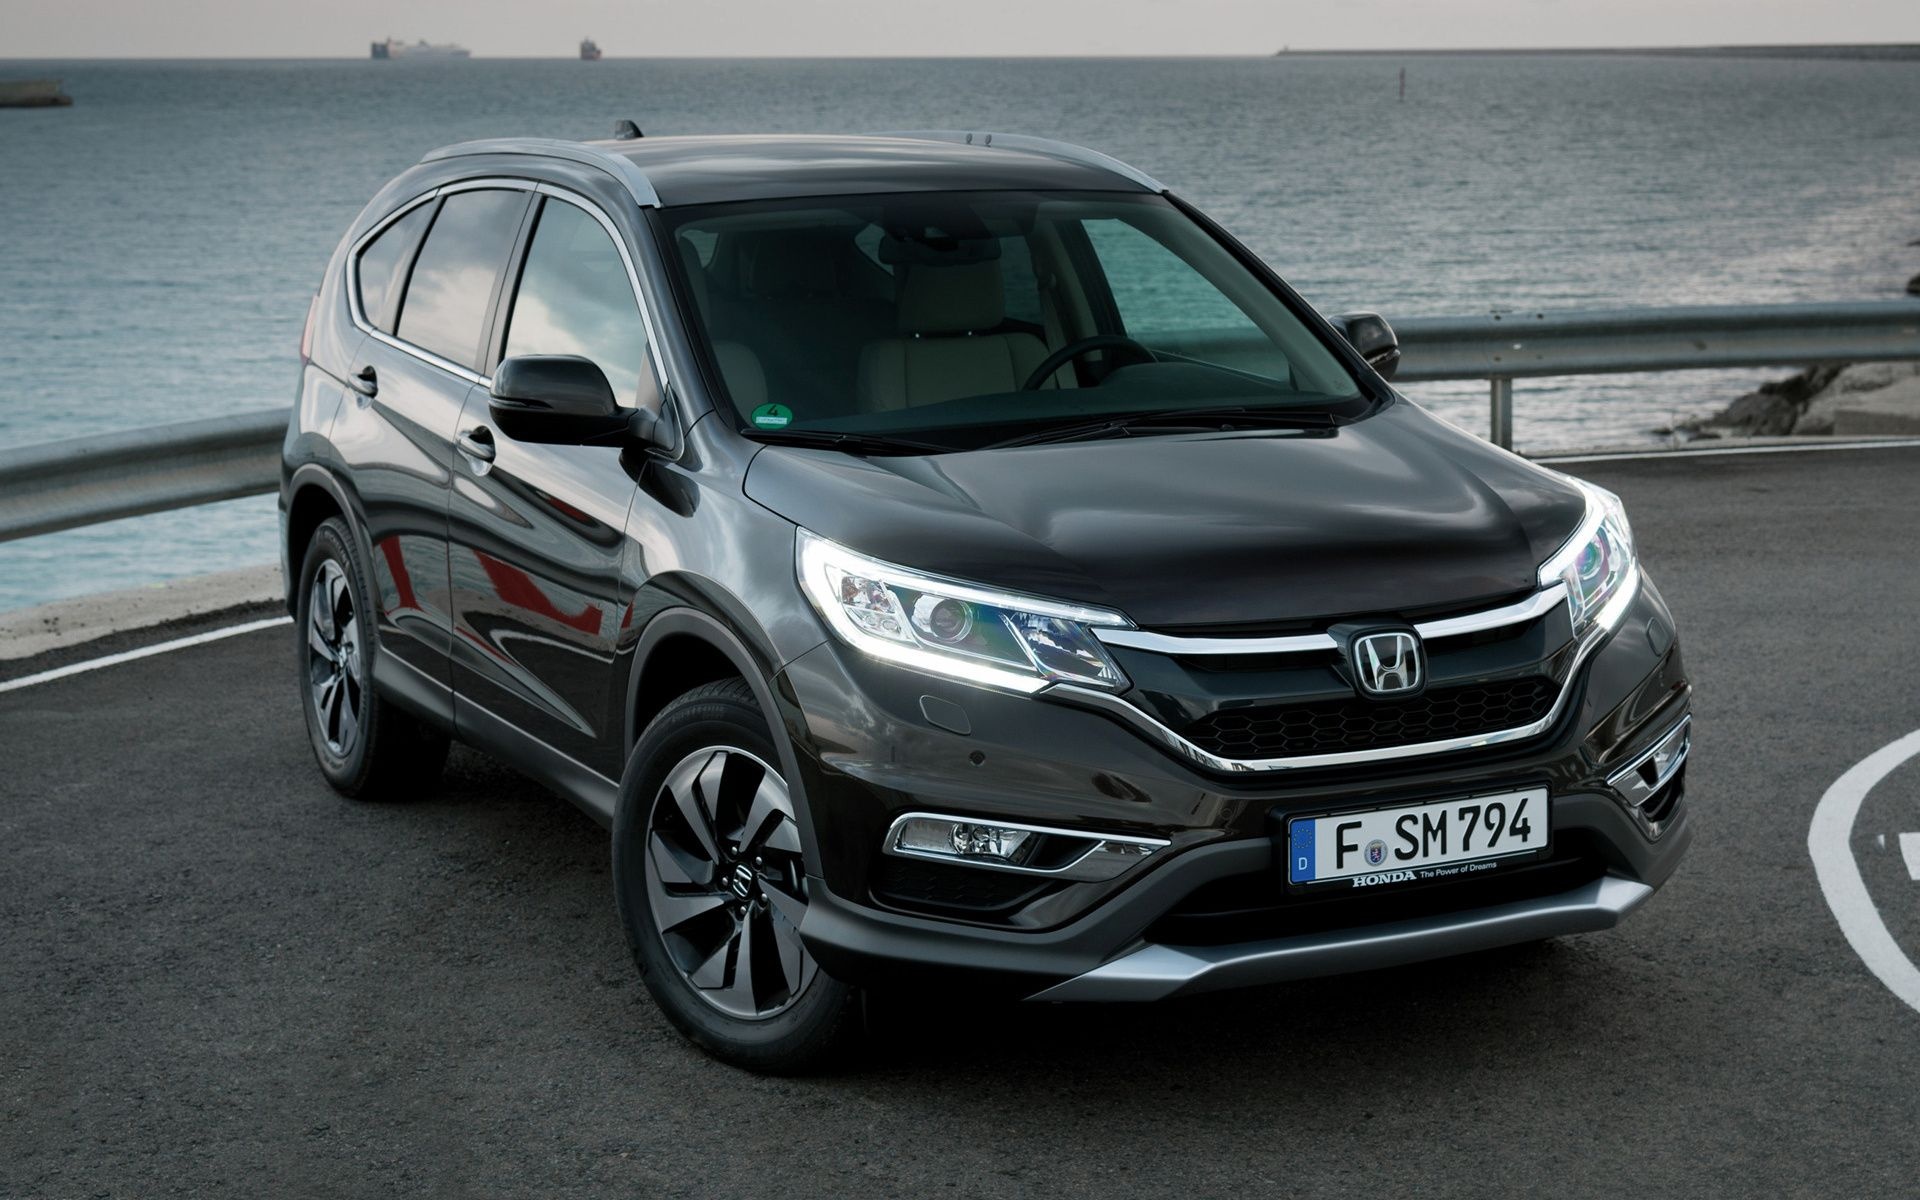 Honda CR-V, Collection of wallpapers, Variety of options, 1920x1200 HD Desktop